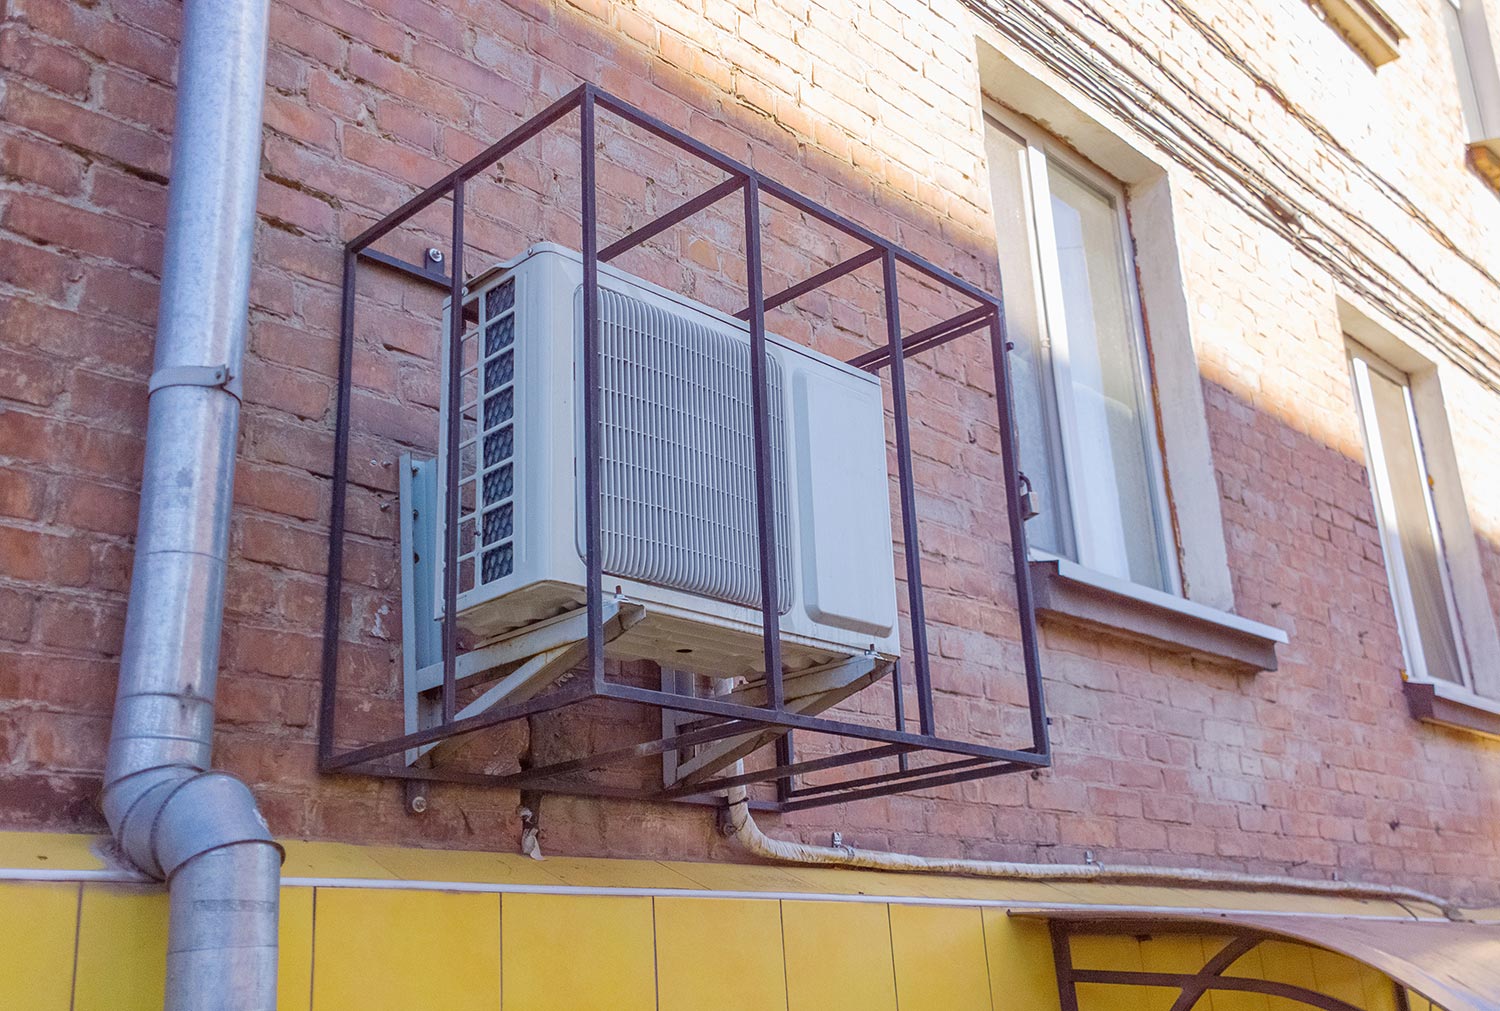 Air conditioning unit with anti-vandal metal grille on the brick wall